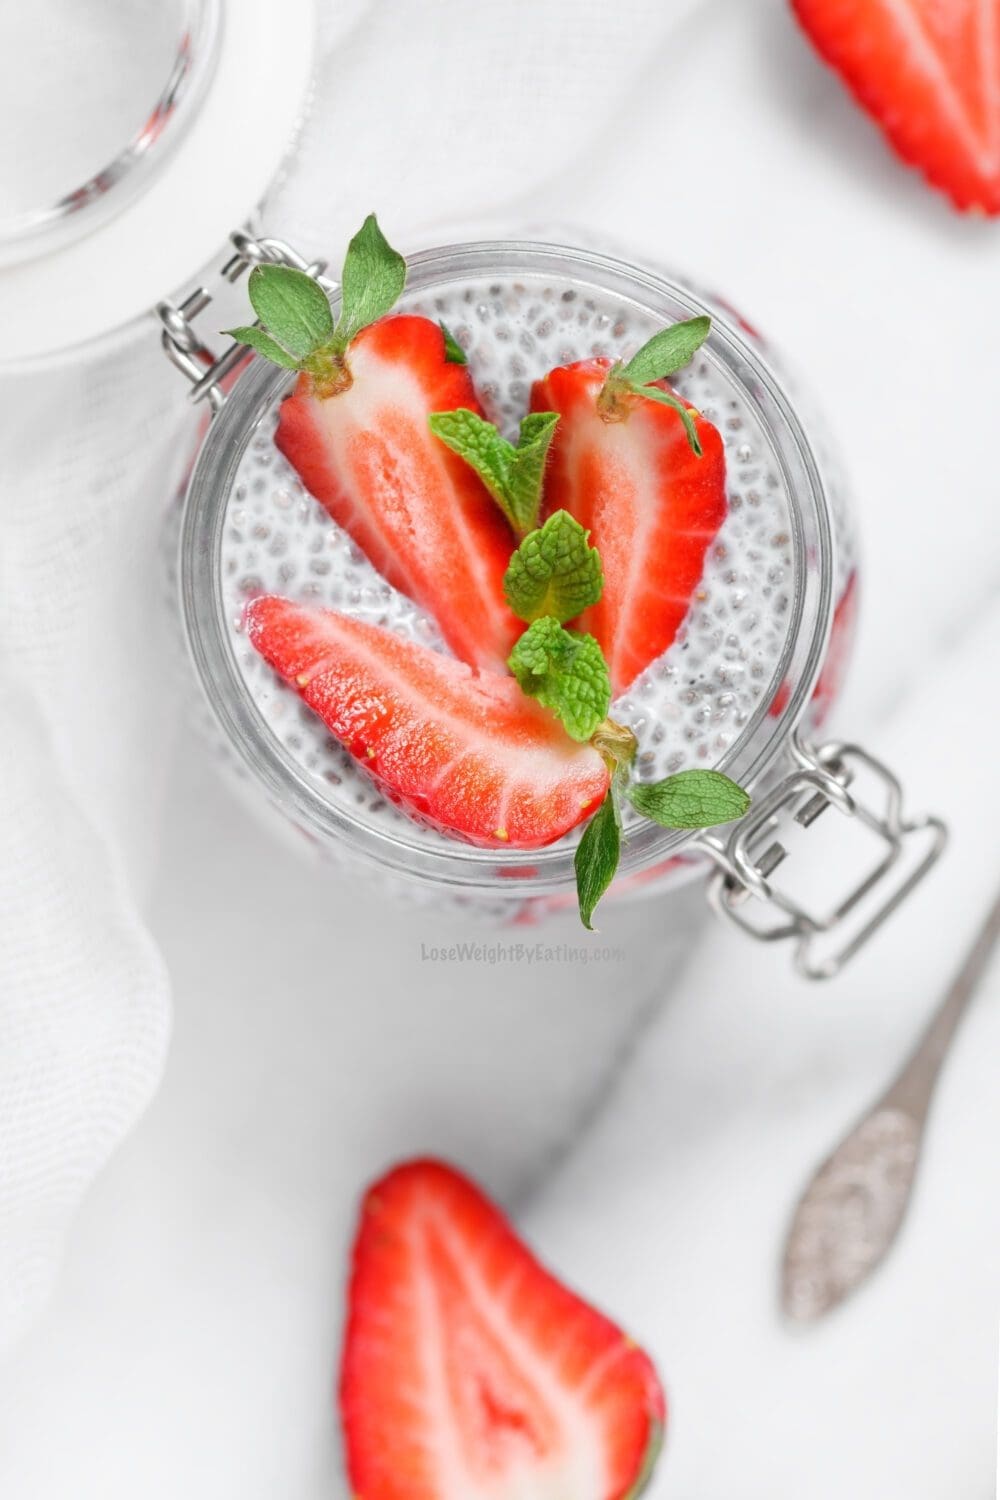 Low Calorie Chia Pudding